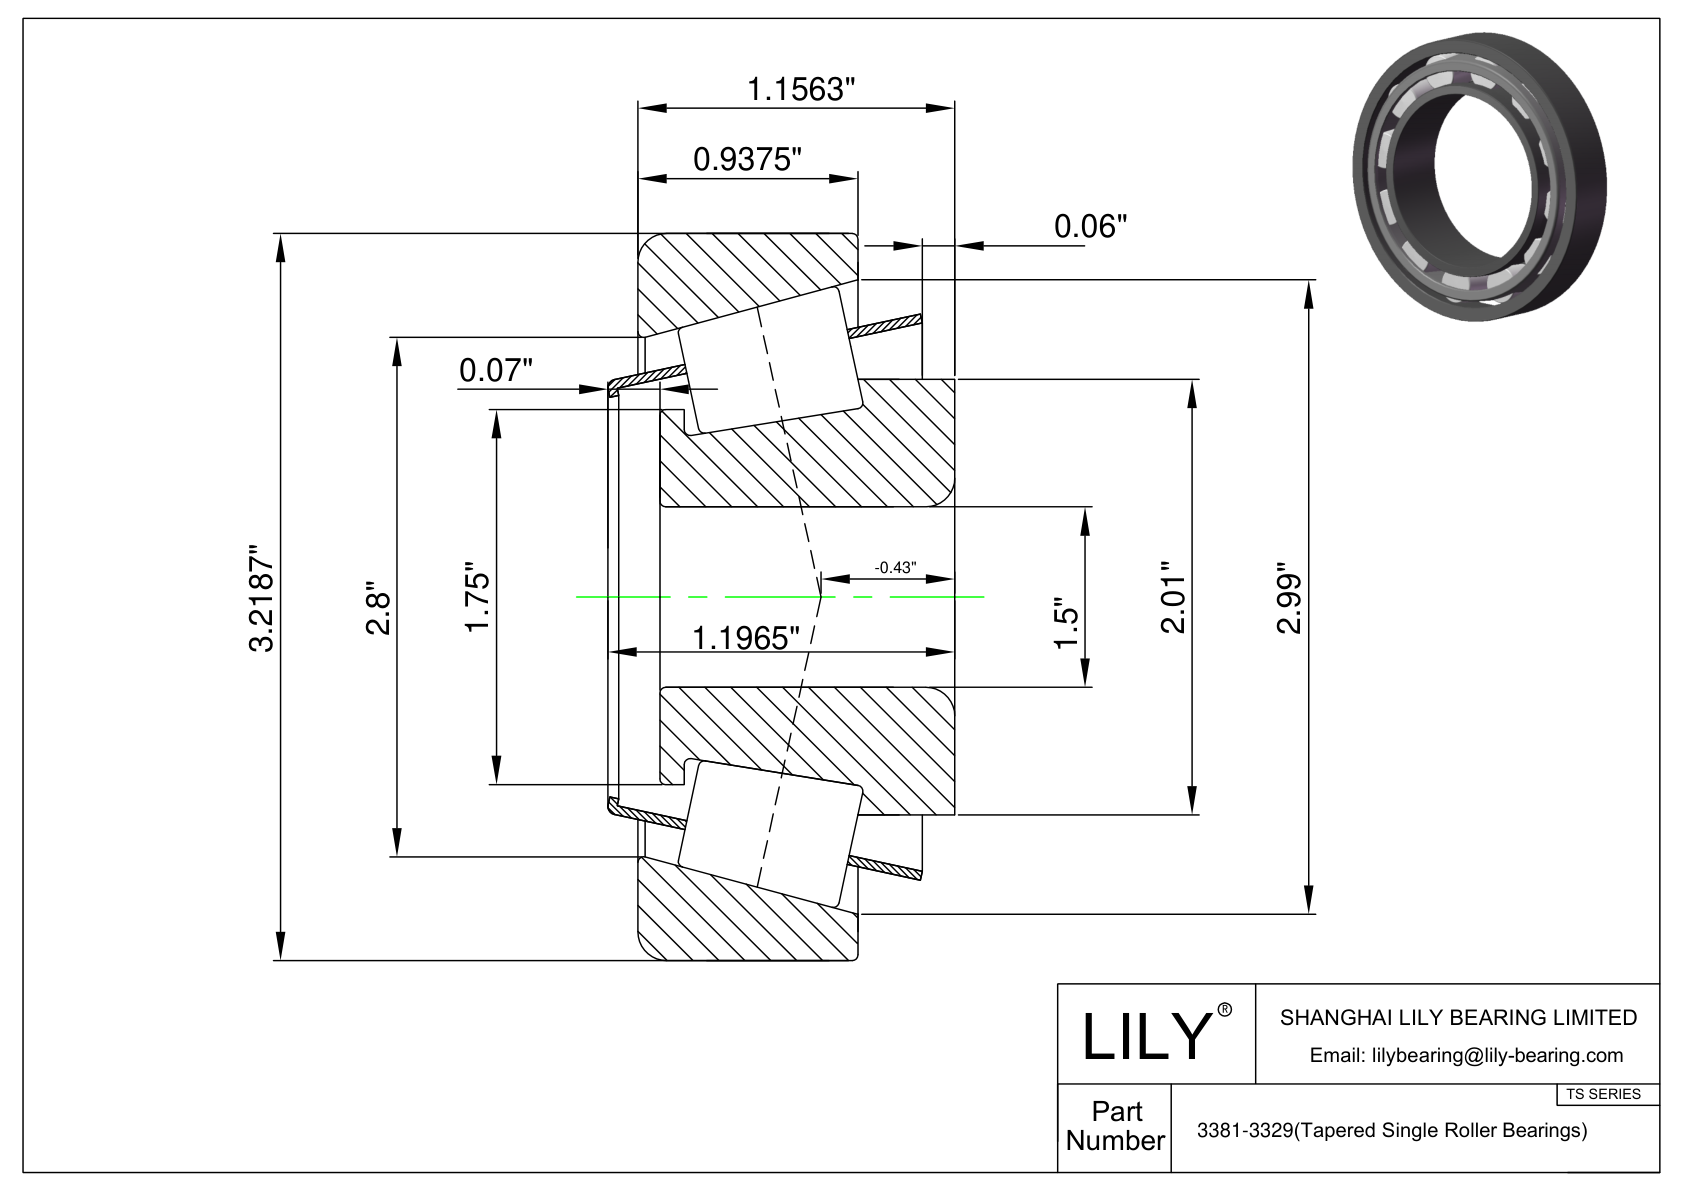 3381-3329 TS (Tapered Single Roller Bearings) (Imperial) cad drawing